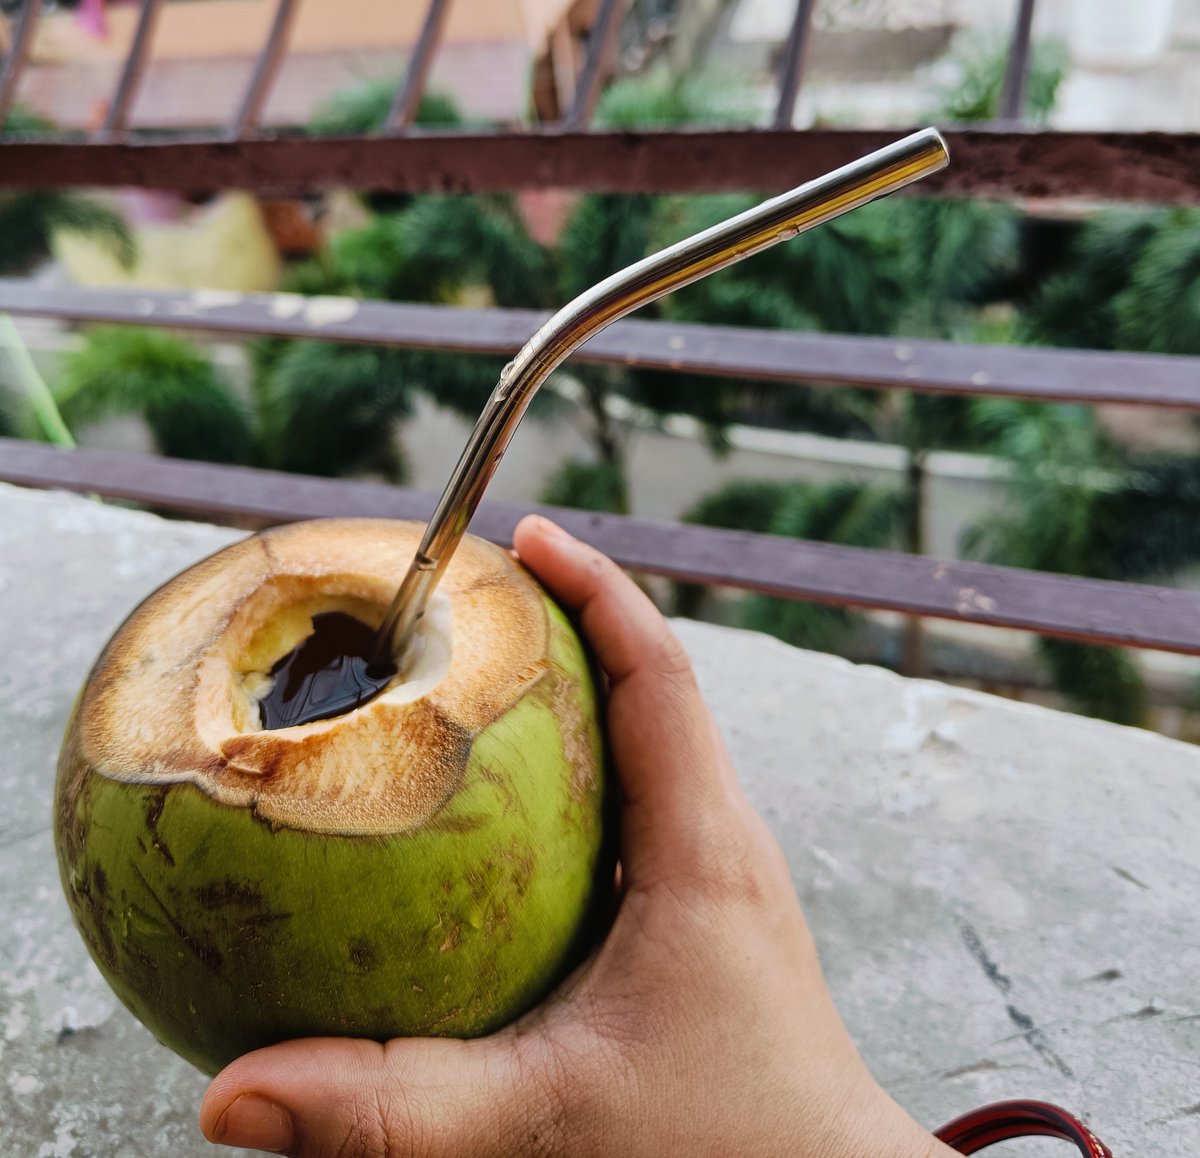 Steel straw because we should stop using plastic straws. 
#saynotoplastic 
#coconutwater 
#healthymorning